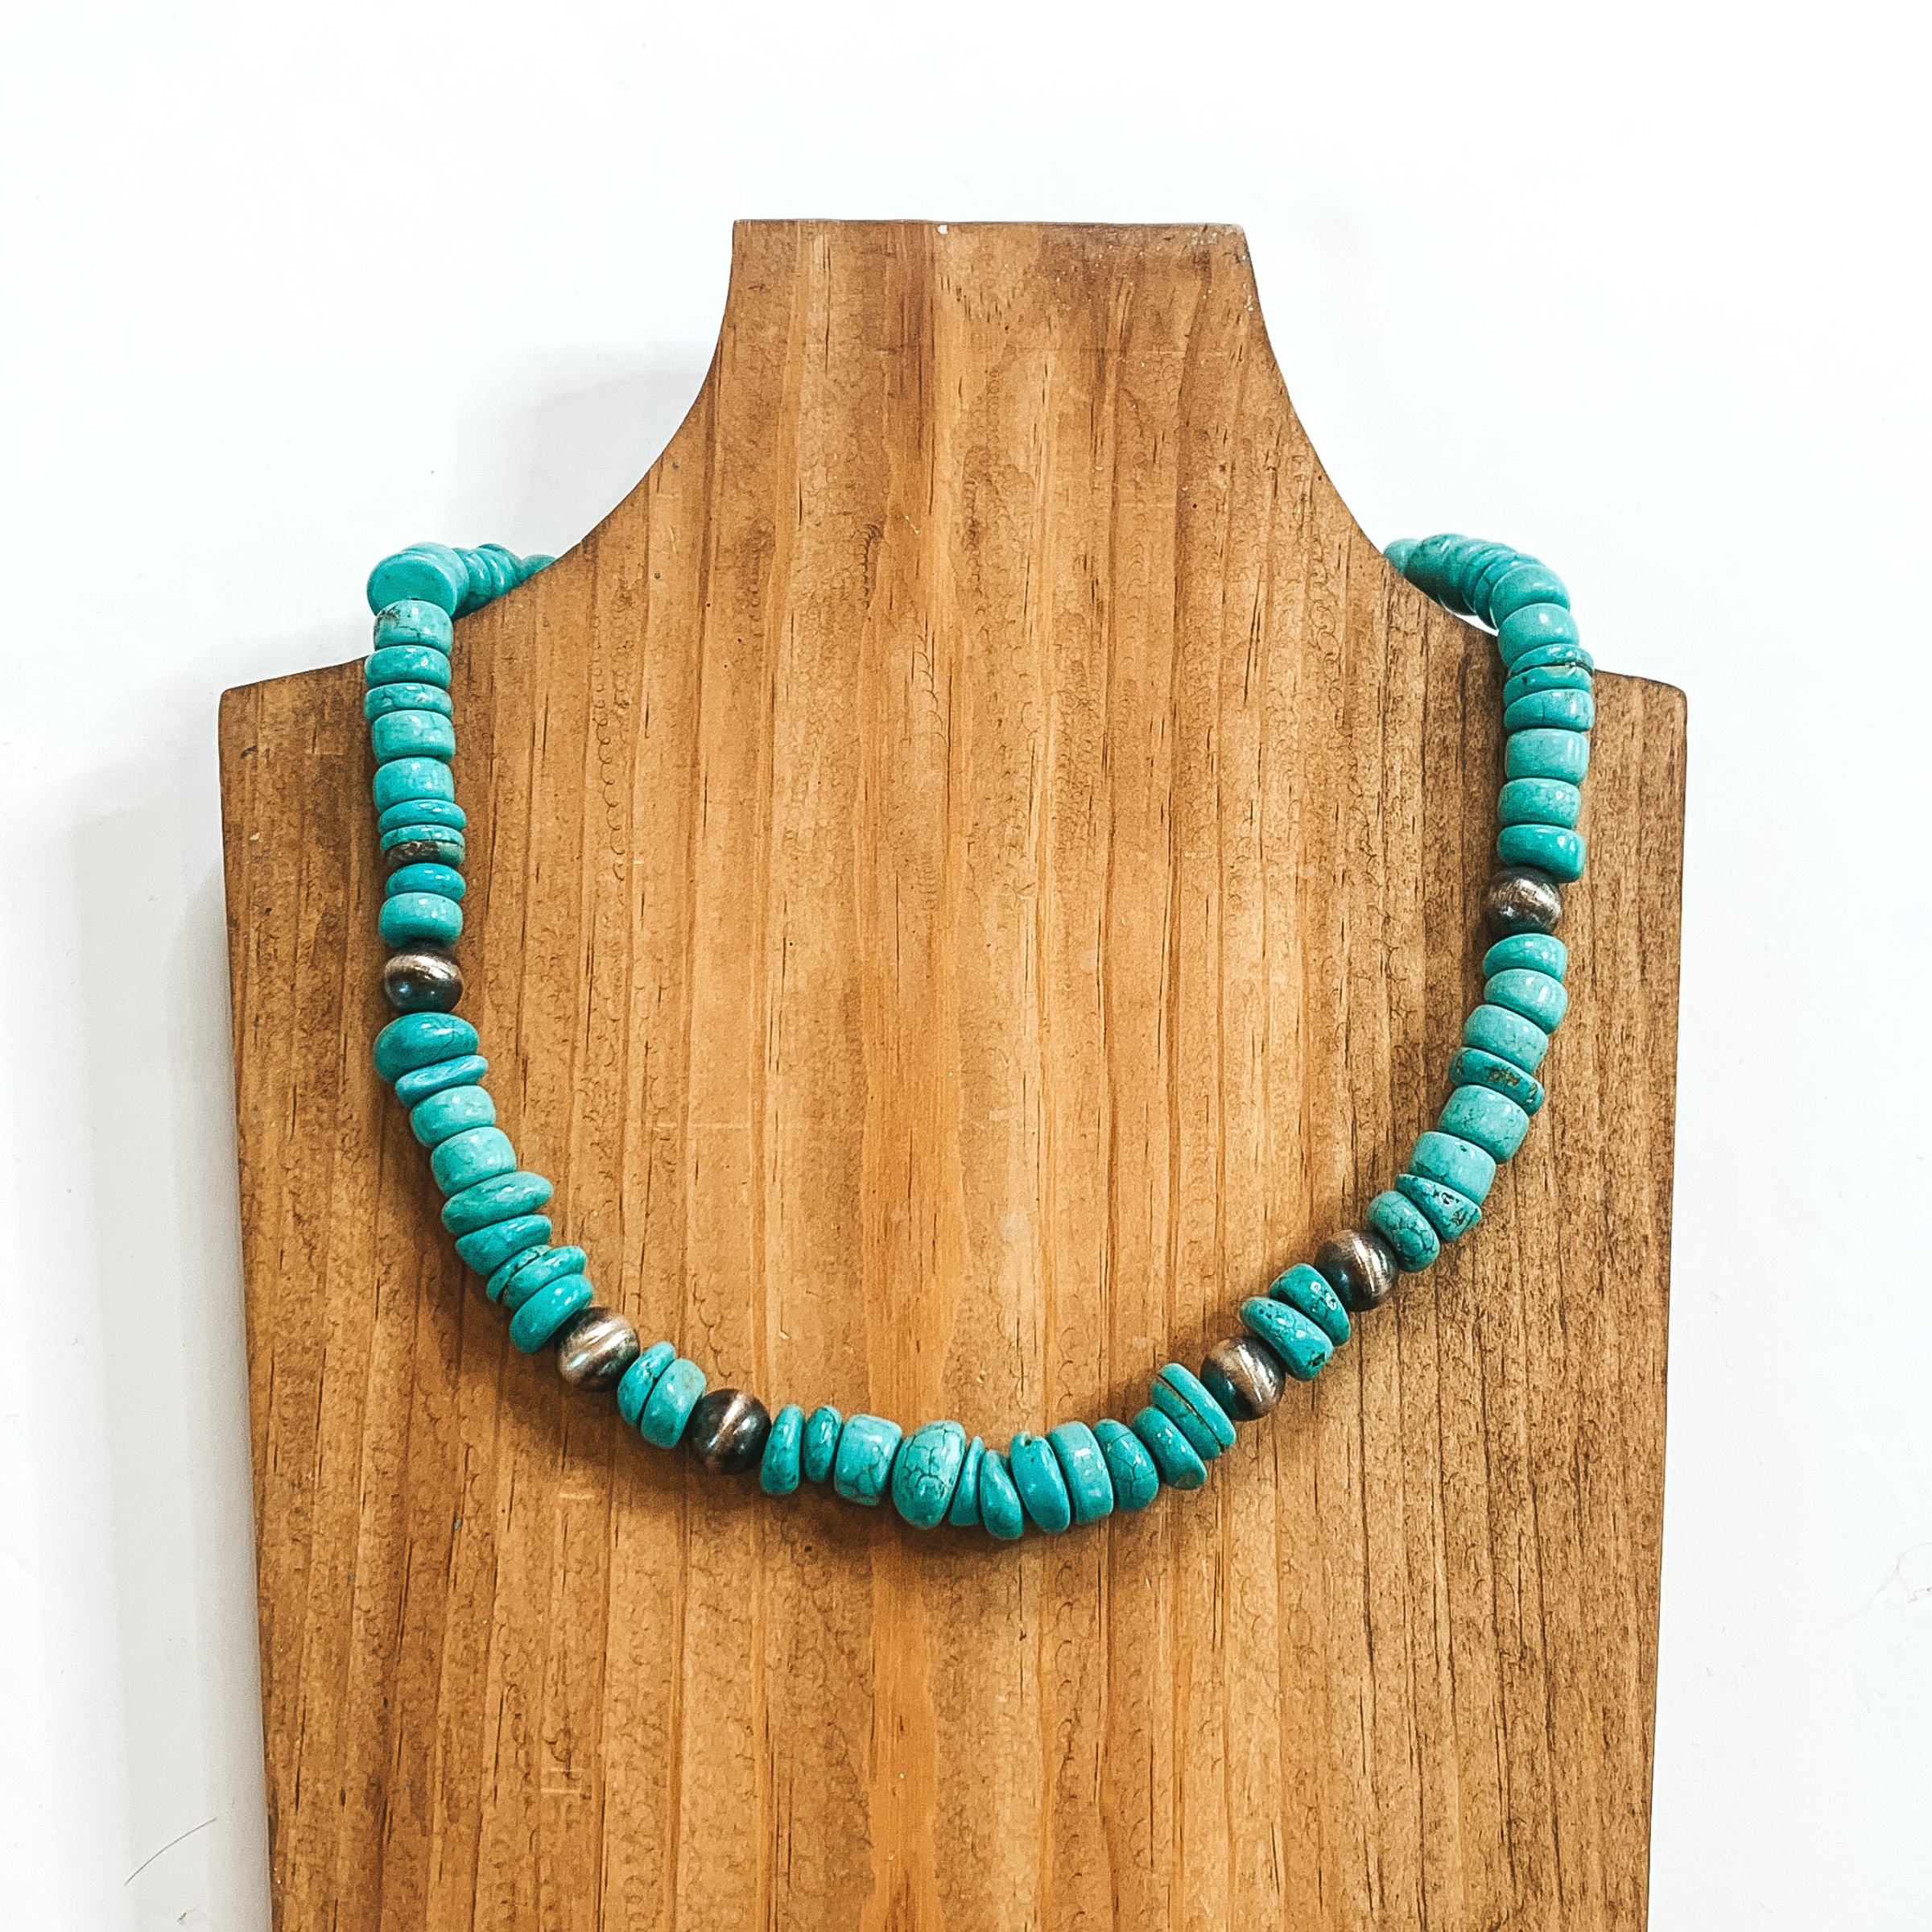 Turquoise chip beaded necklace with silver bead spacers. This necklace is pictured on a wood necklace holder on a white background. 